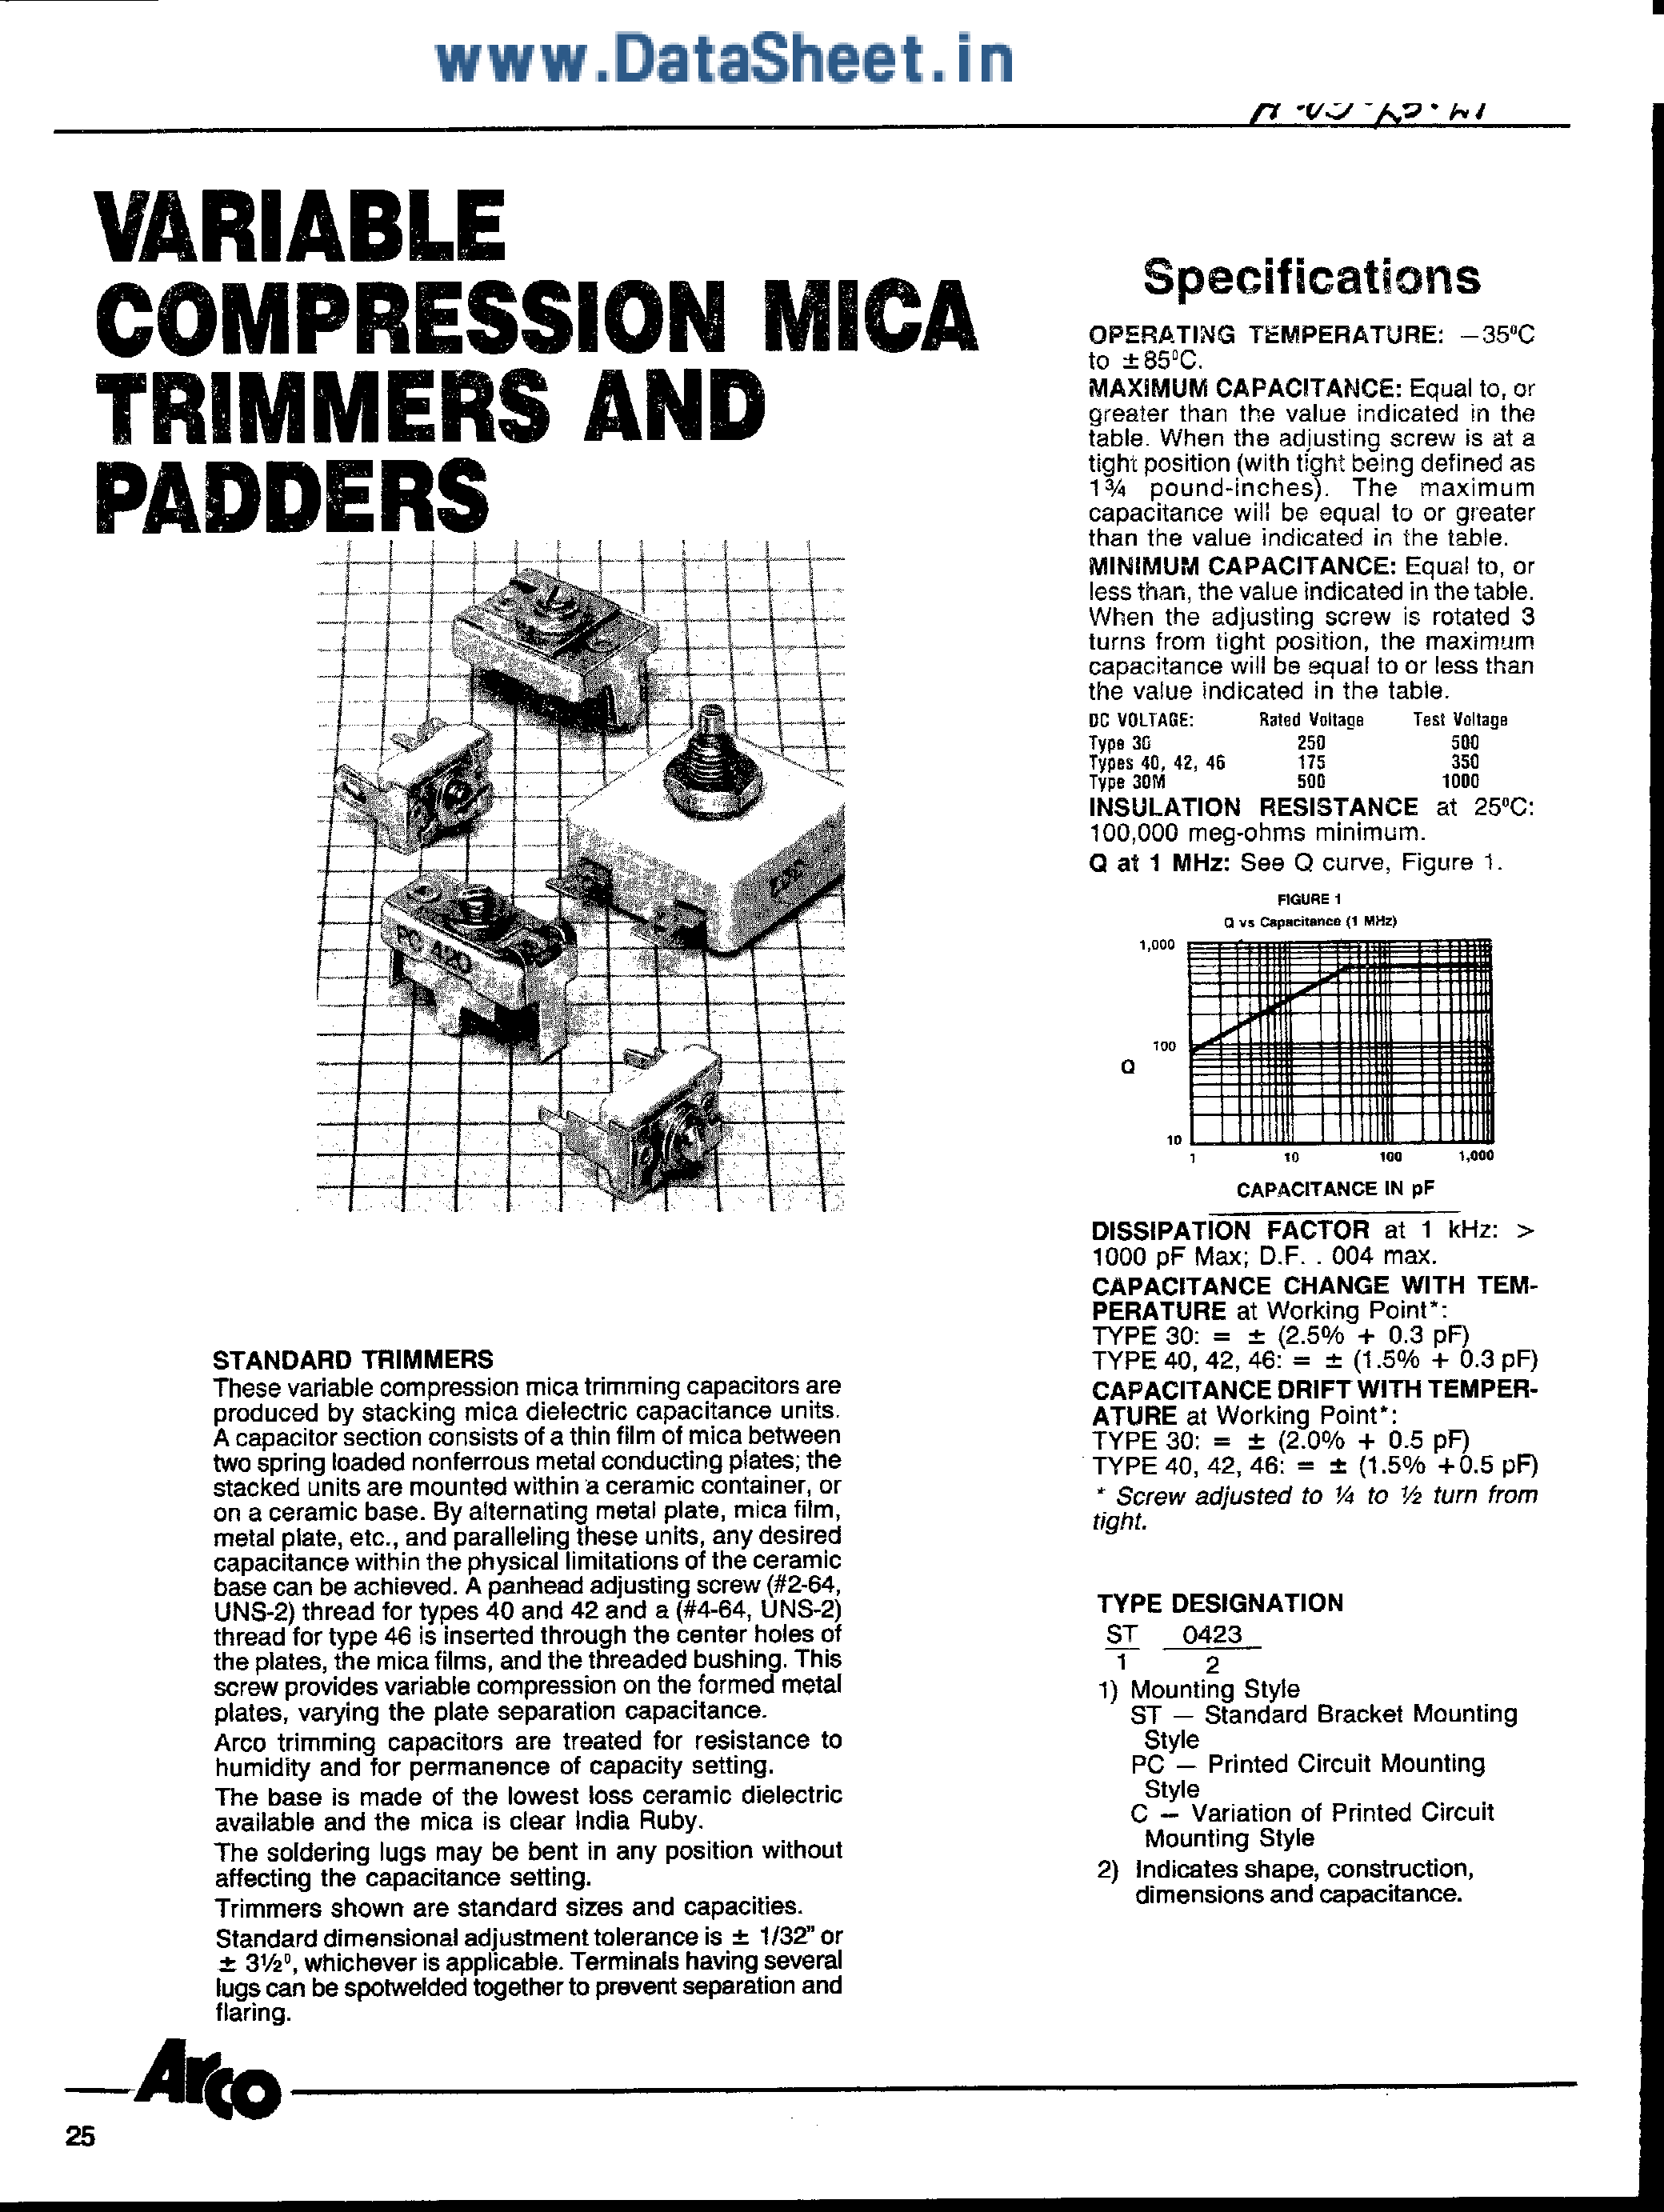 Даташит ST422 - Variable Compression Mica Trimmers and Padders страница 1